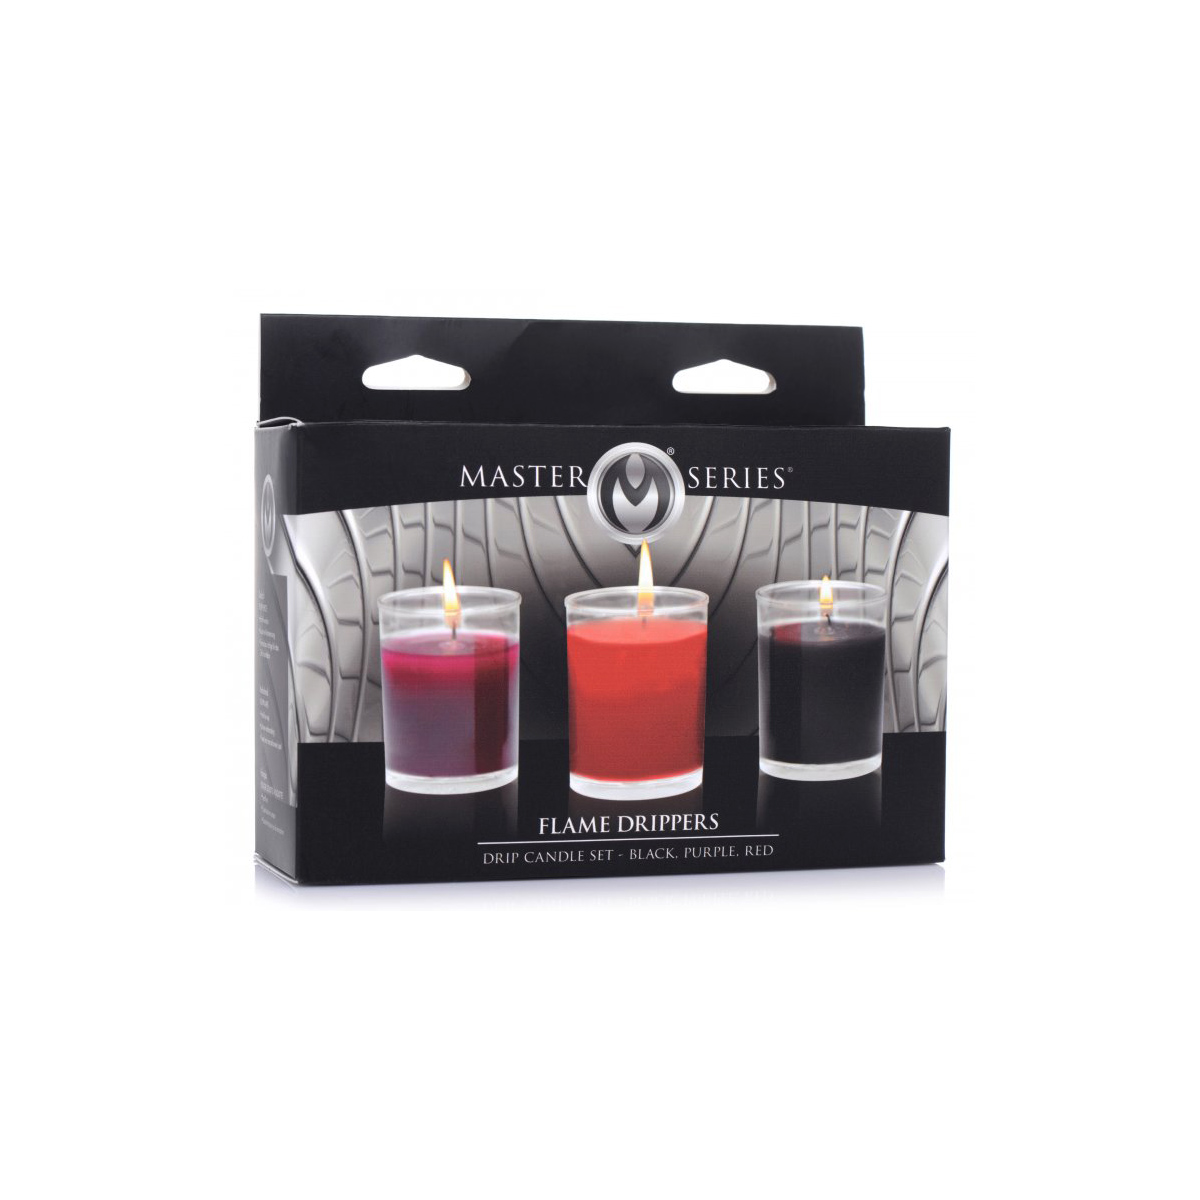 Flame-Drippers-Candle-Set-Designed-for-Wax-Play-118-XR-AG652-3